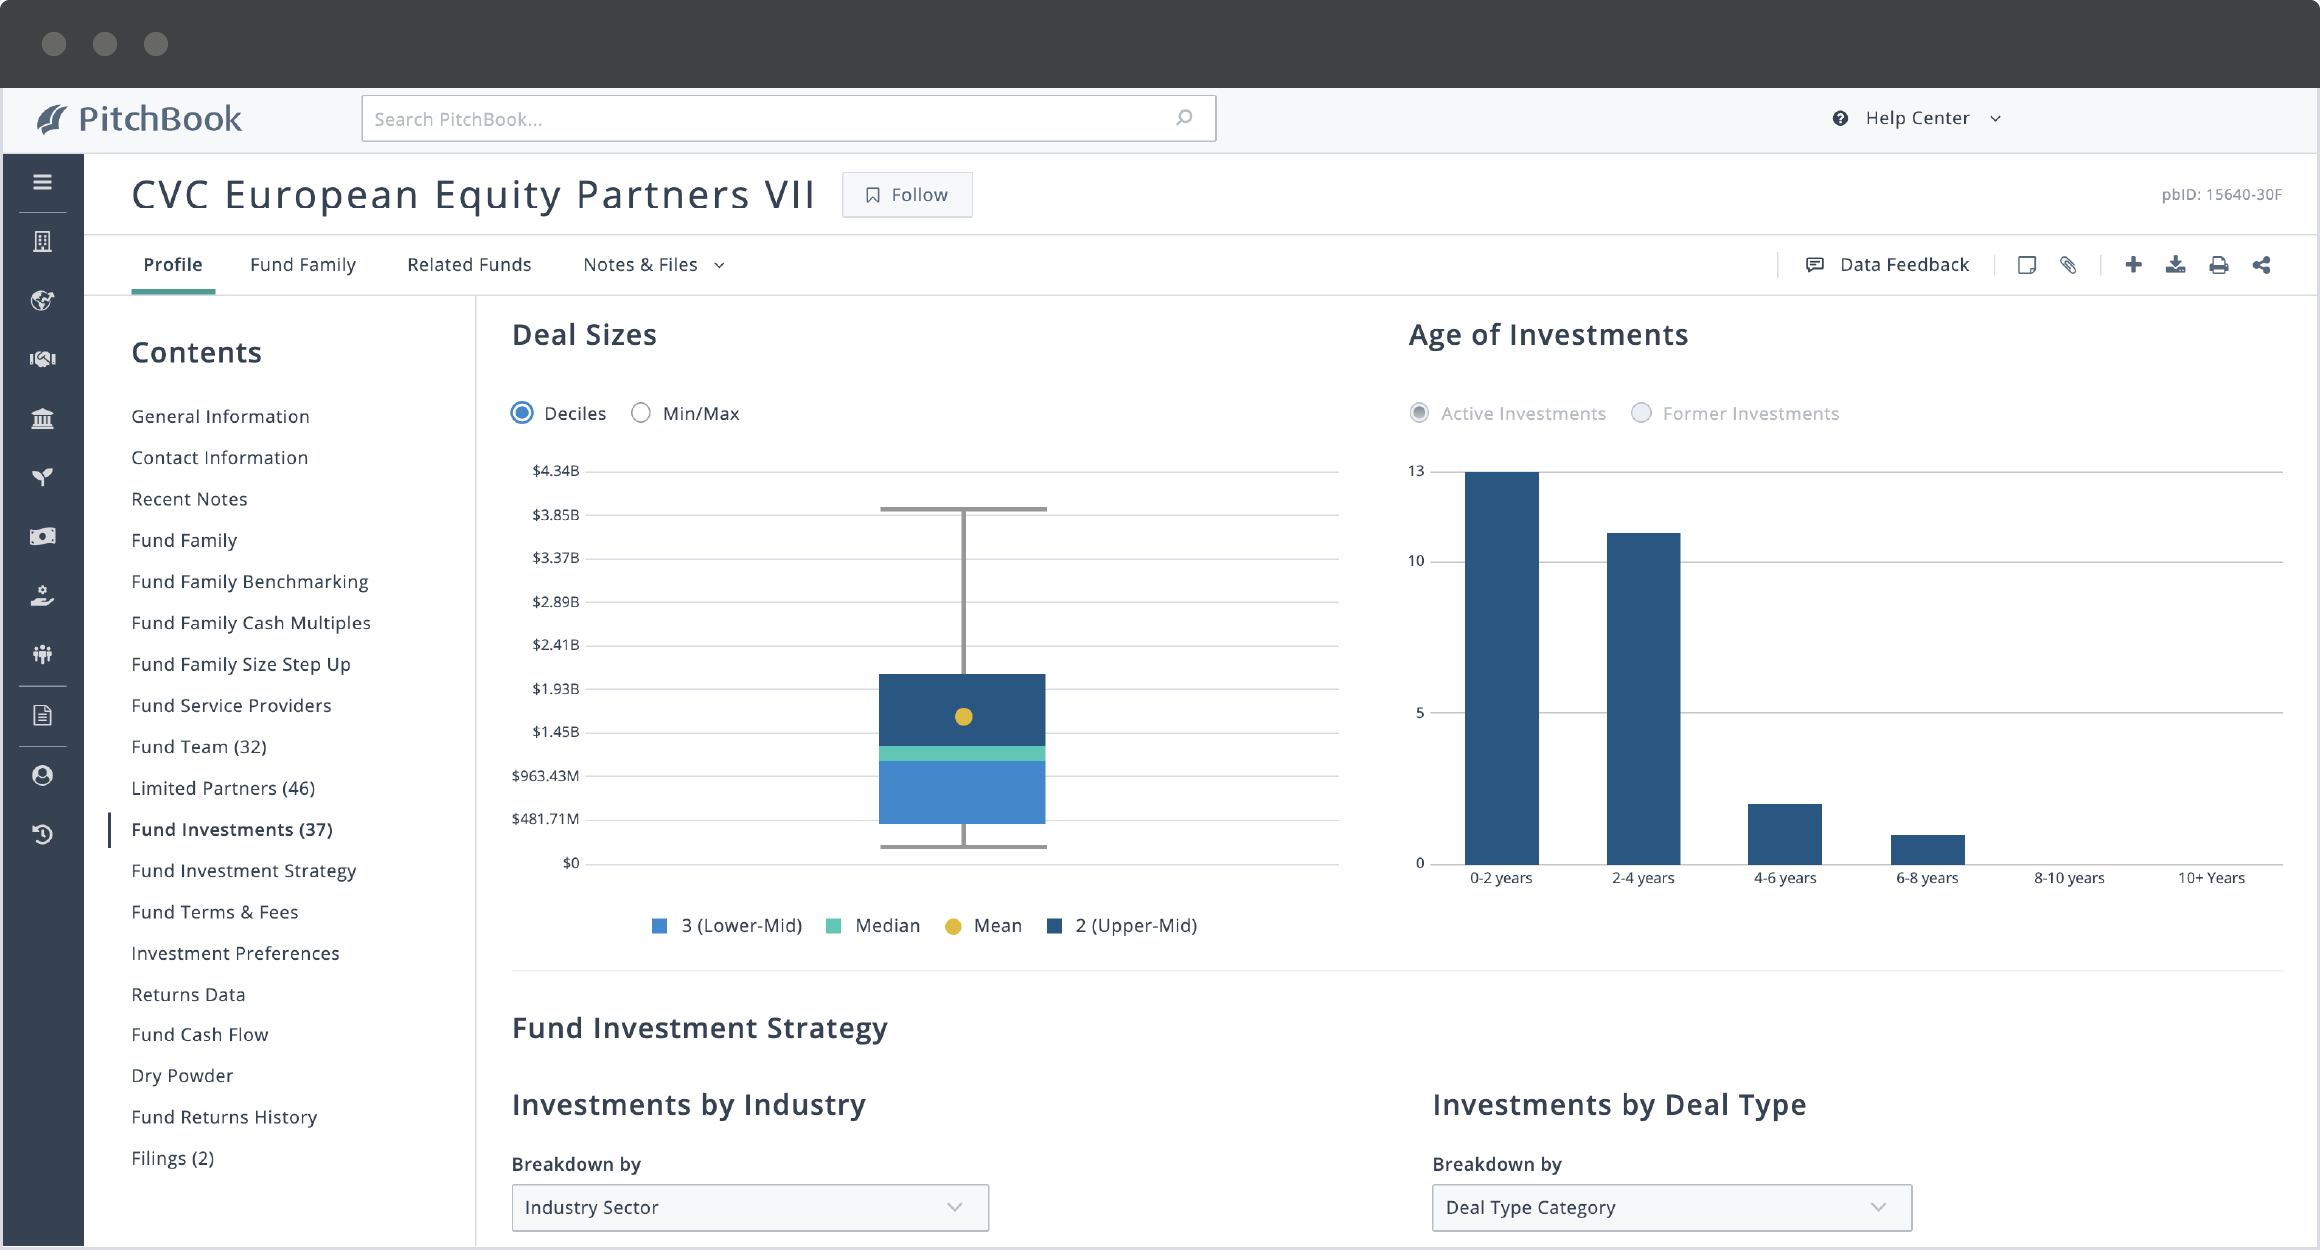 PitchBook fund profile showing analytics for CVC European Equity Partners VII’s deal sizes and age of investments.